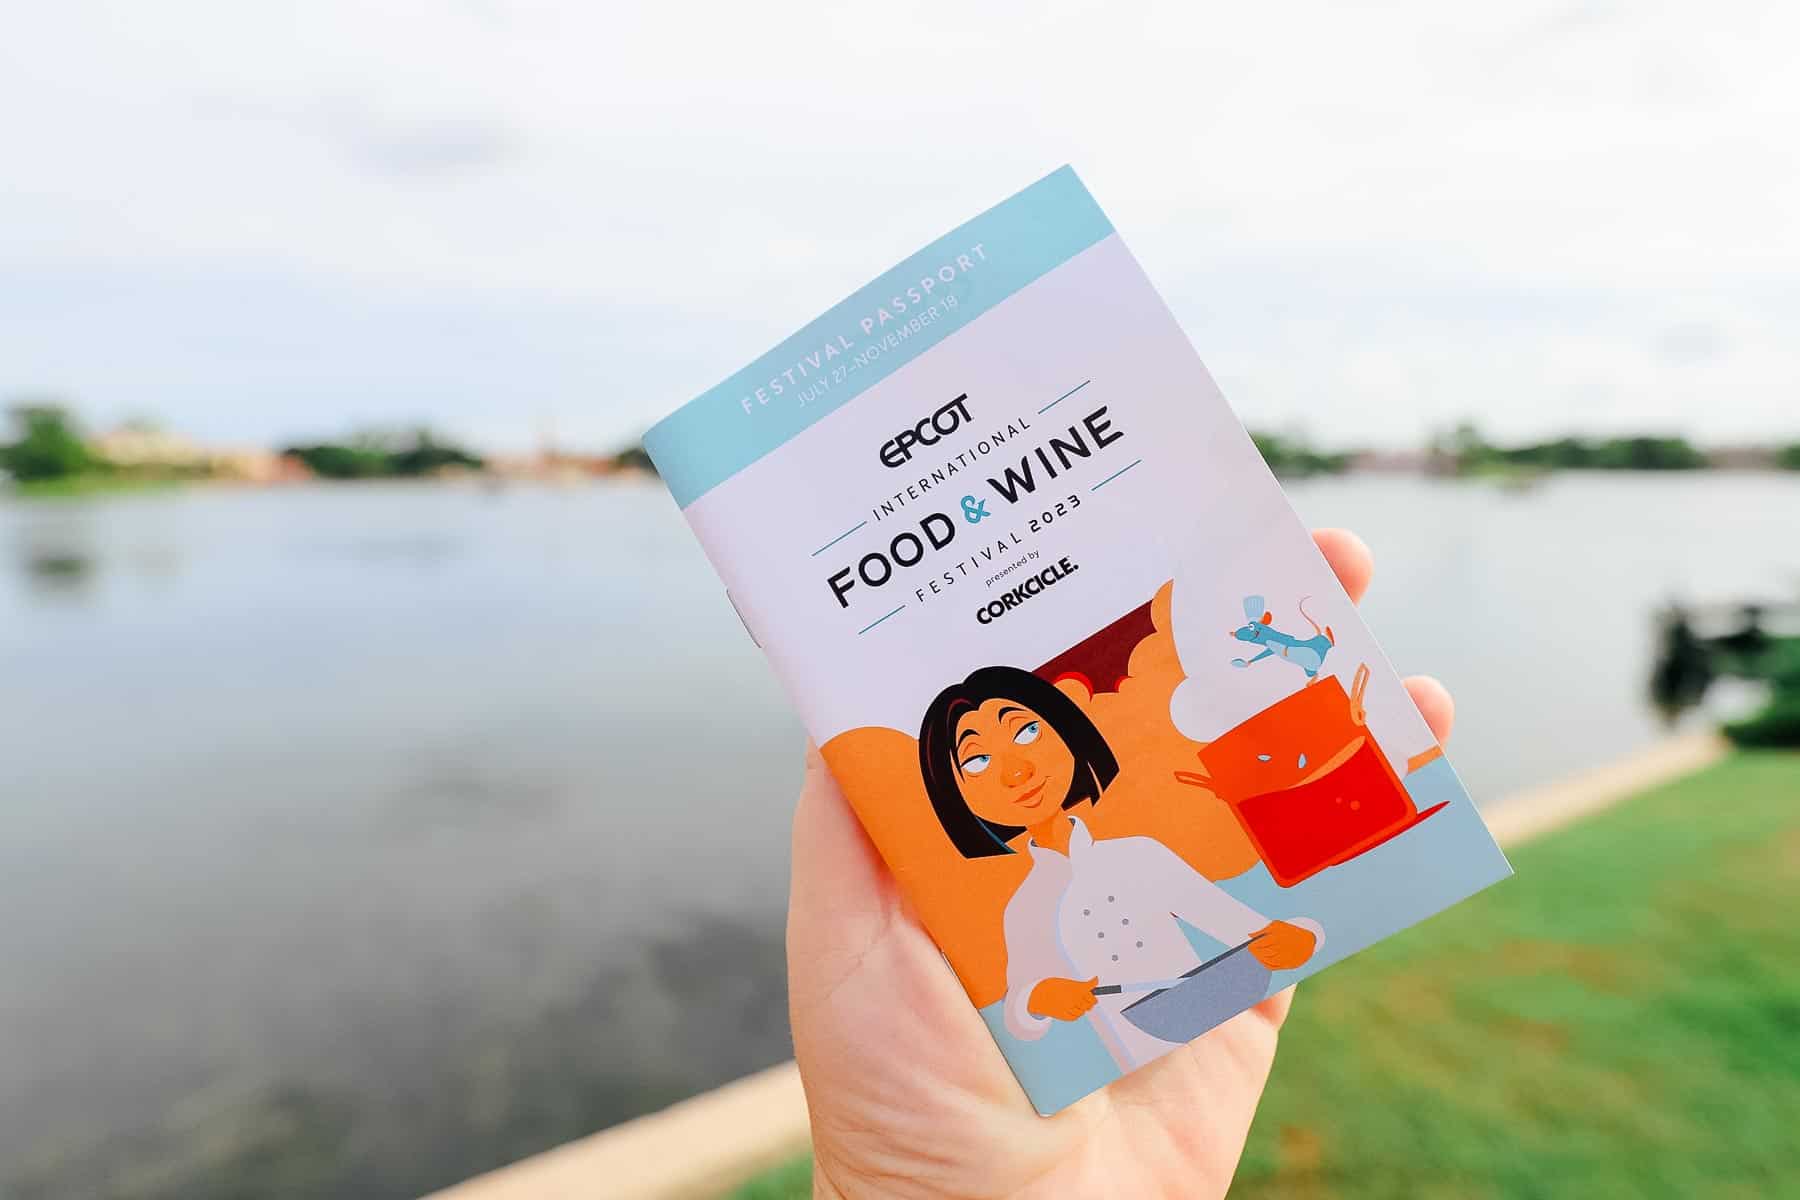 Things to Do at the Epcot International Food and Wine Festival